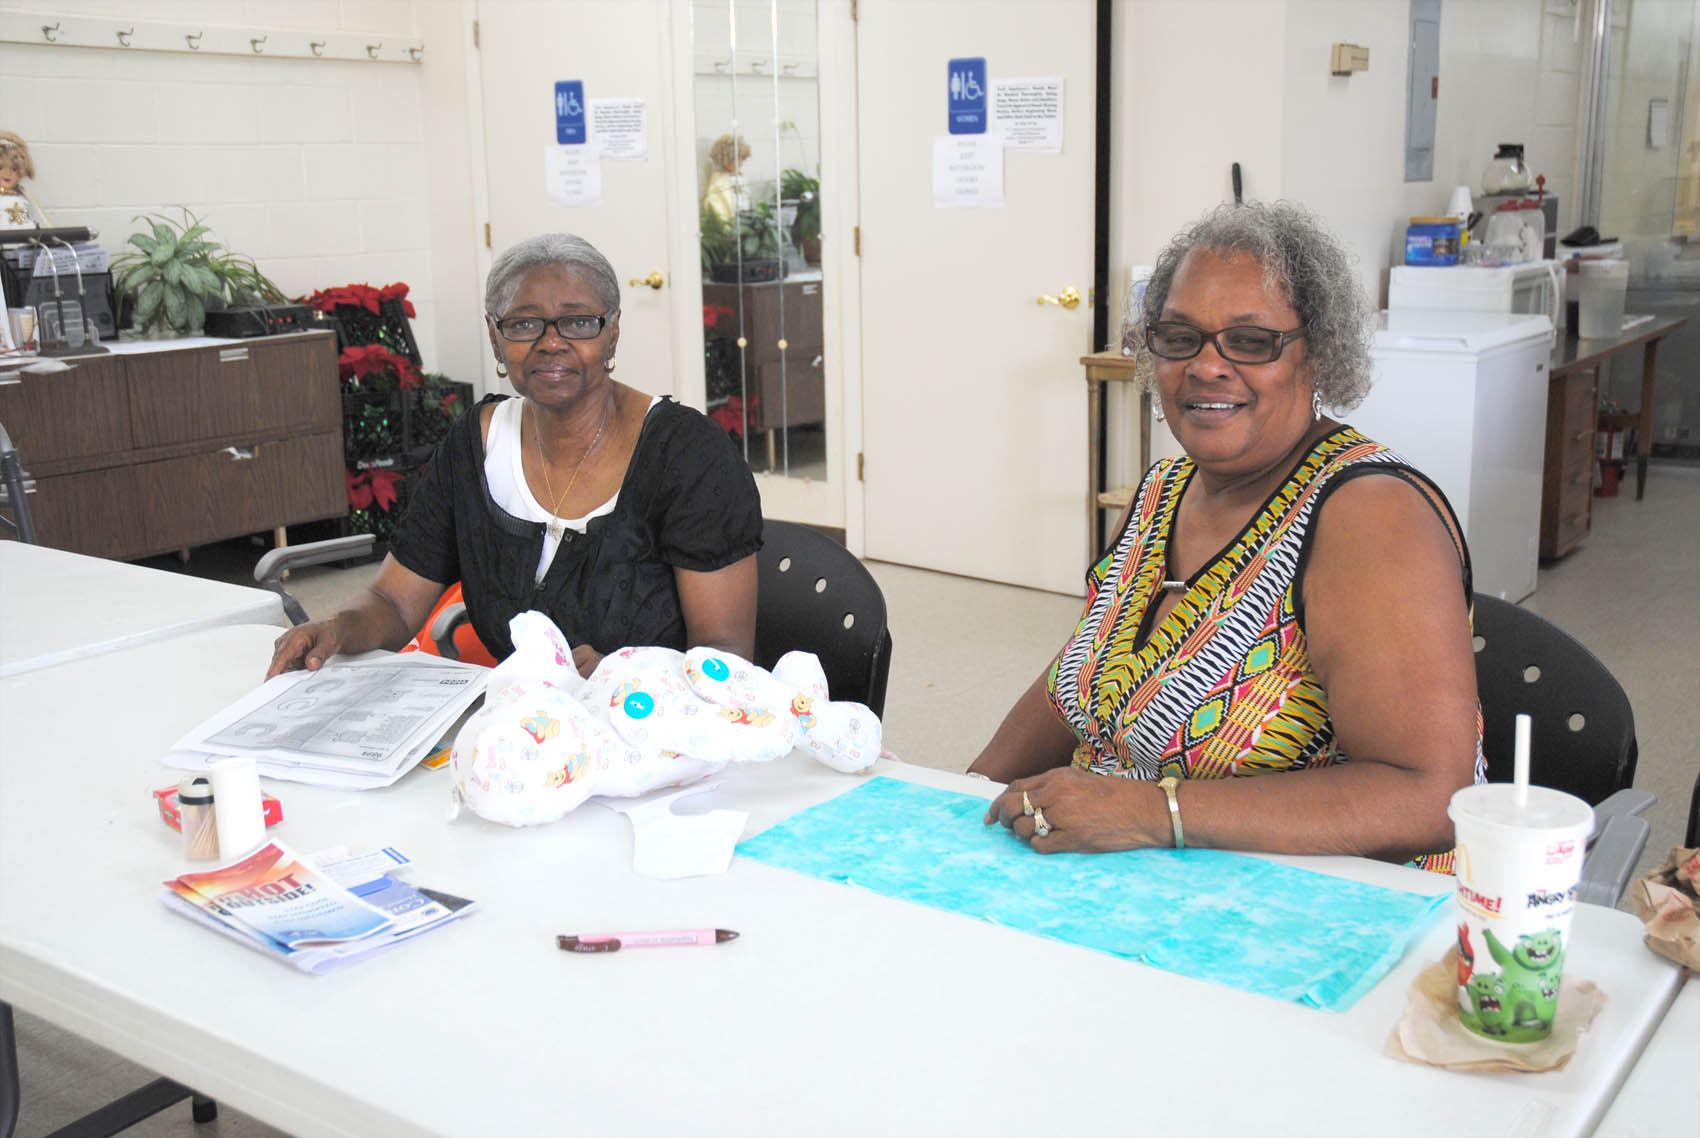 Click to enlarge,  Mary F. McLean and Doris Olds, members of the Dunn Senior Enrichment Center, create an adorable stuffed bear at the soon-to-be relocated center.  